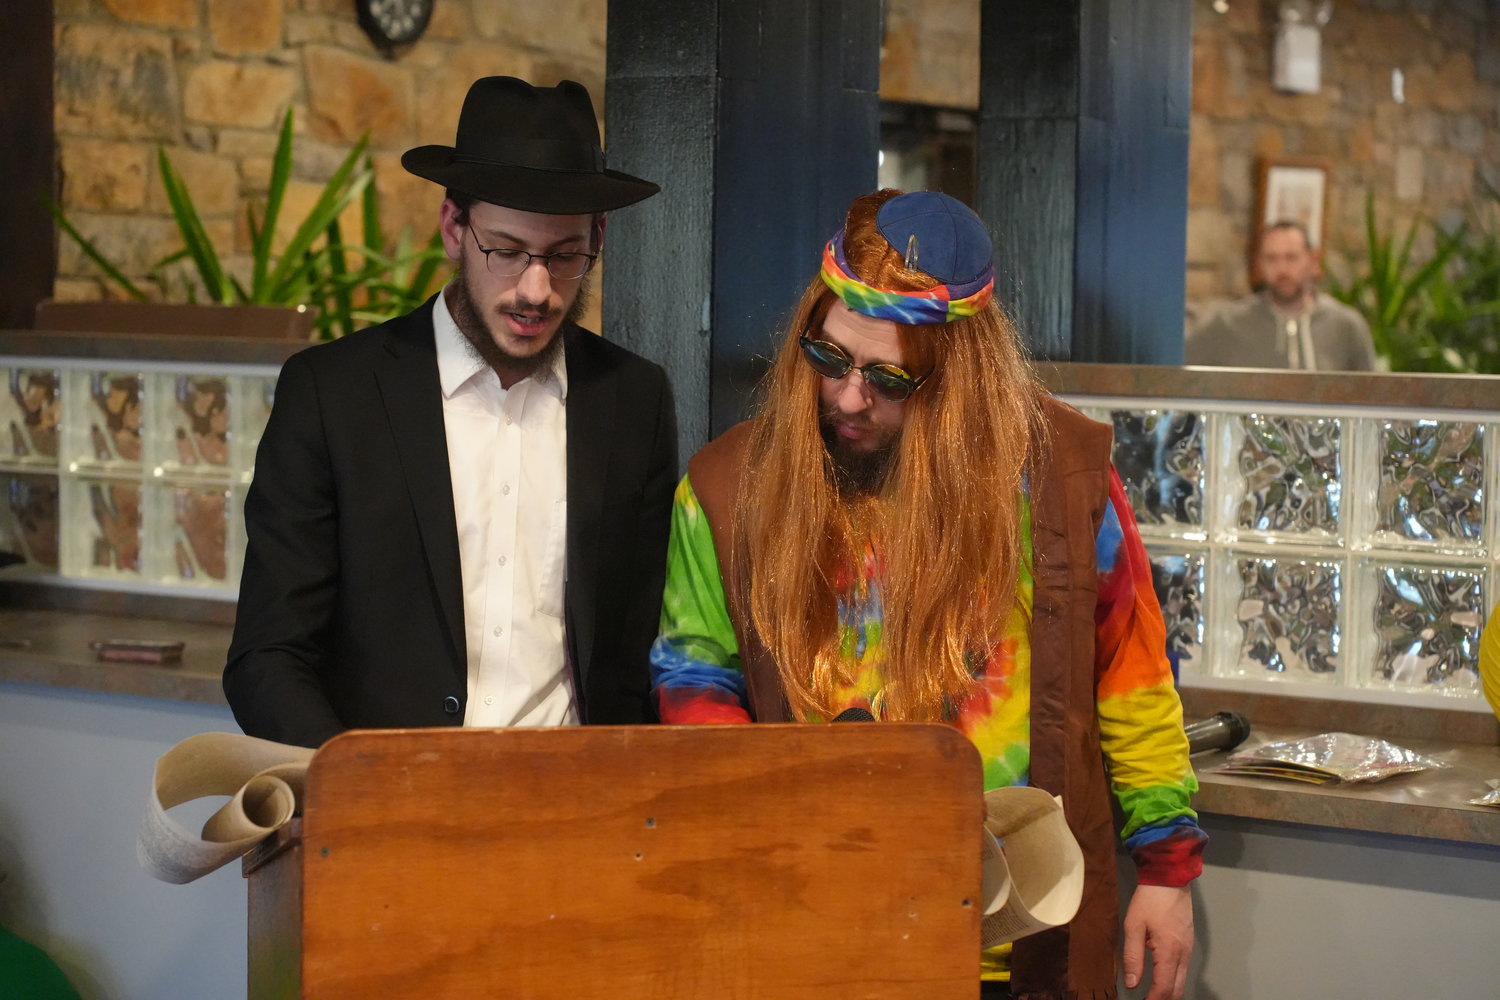 Rabbi Kramer, dressed in tie-dye, read the Megillah with a Yeshiva student at the Chabad of Merrick-Bellmore-Wantagh’s Purim celebration.